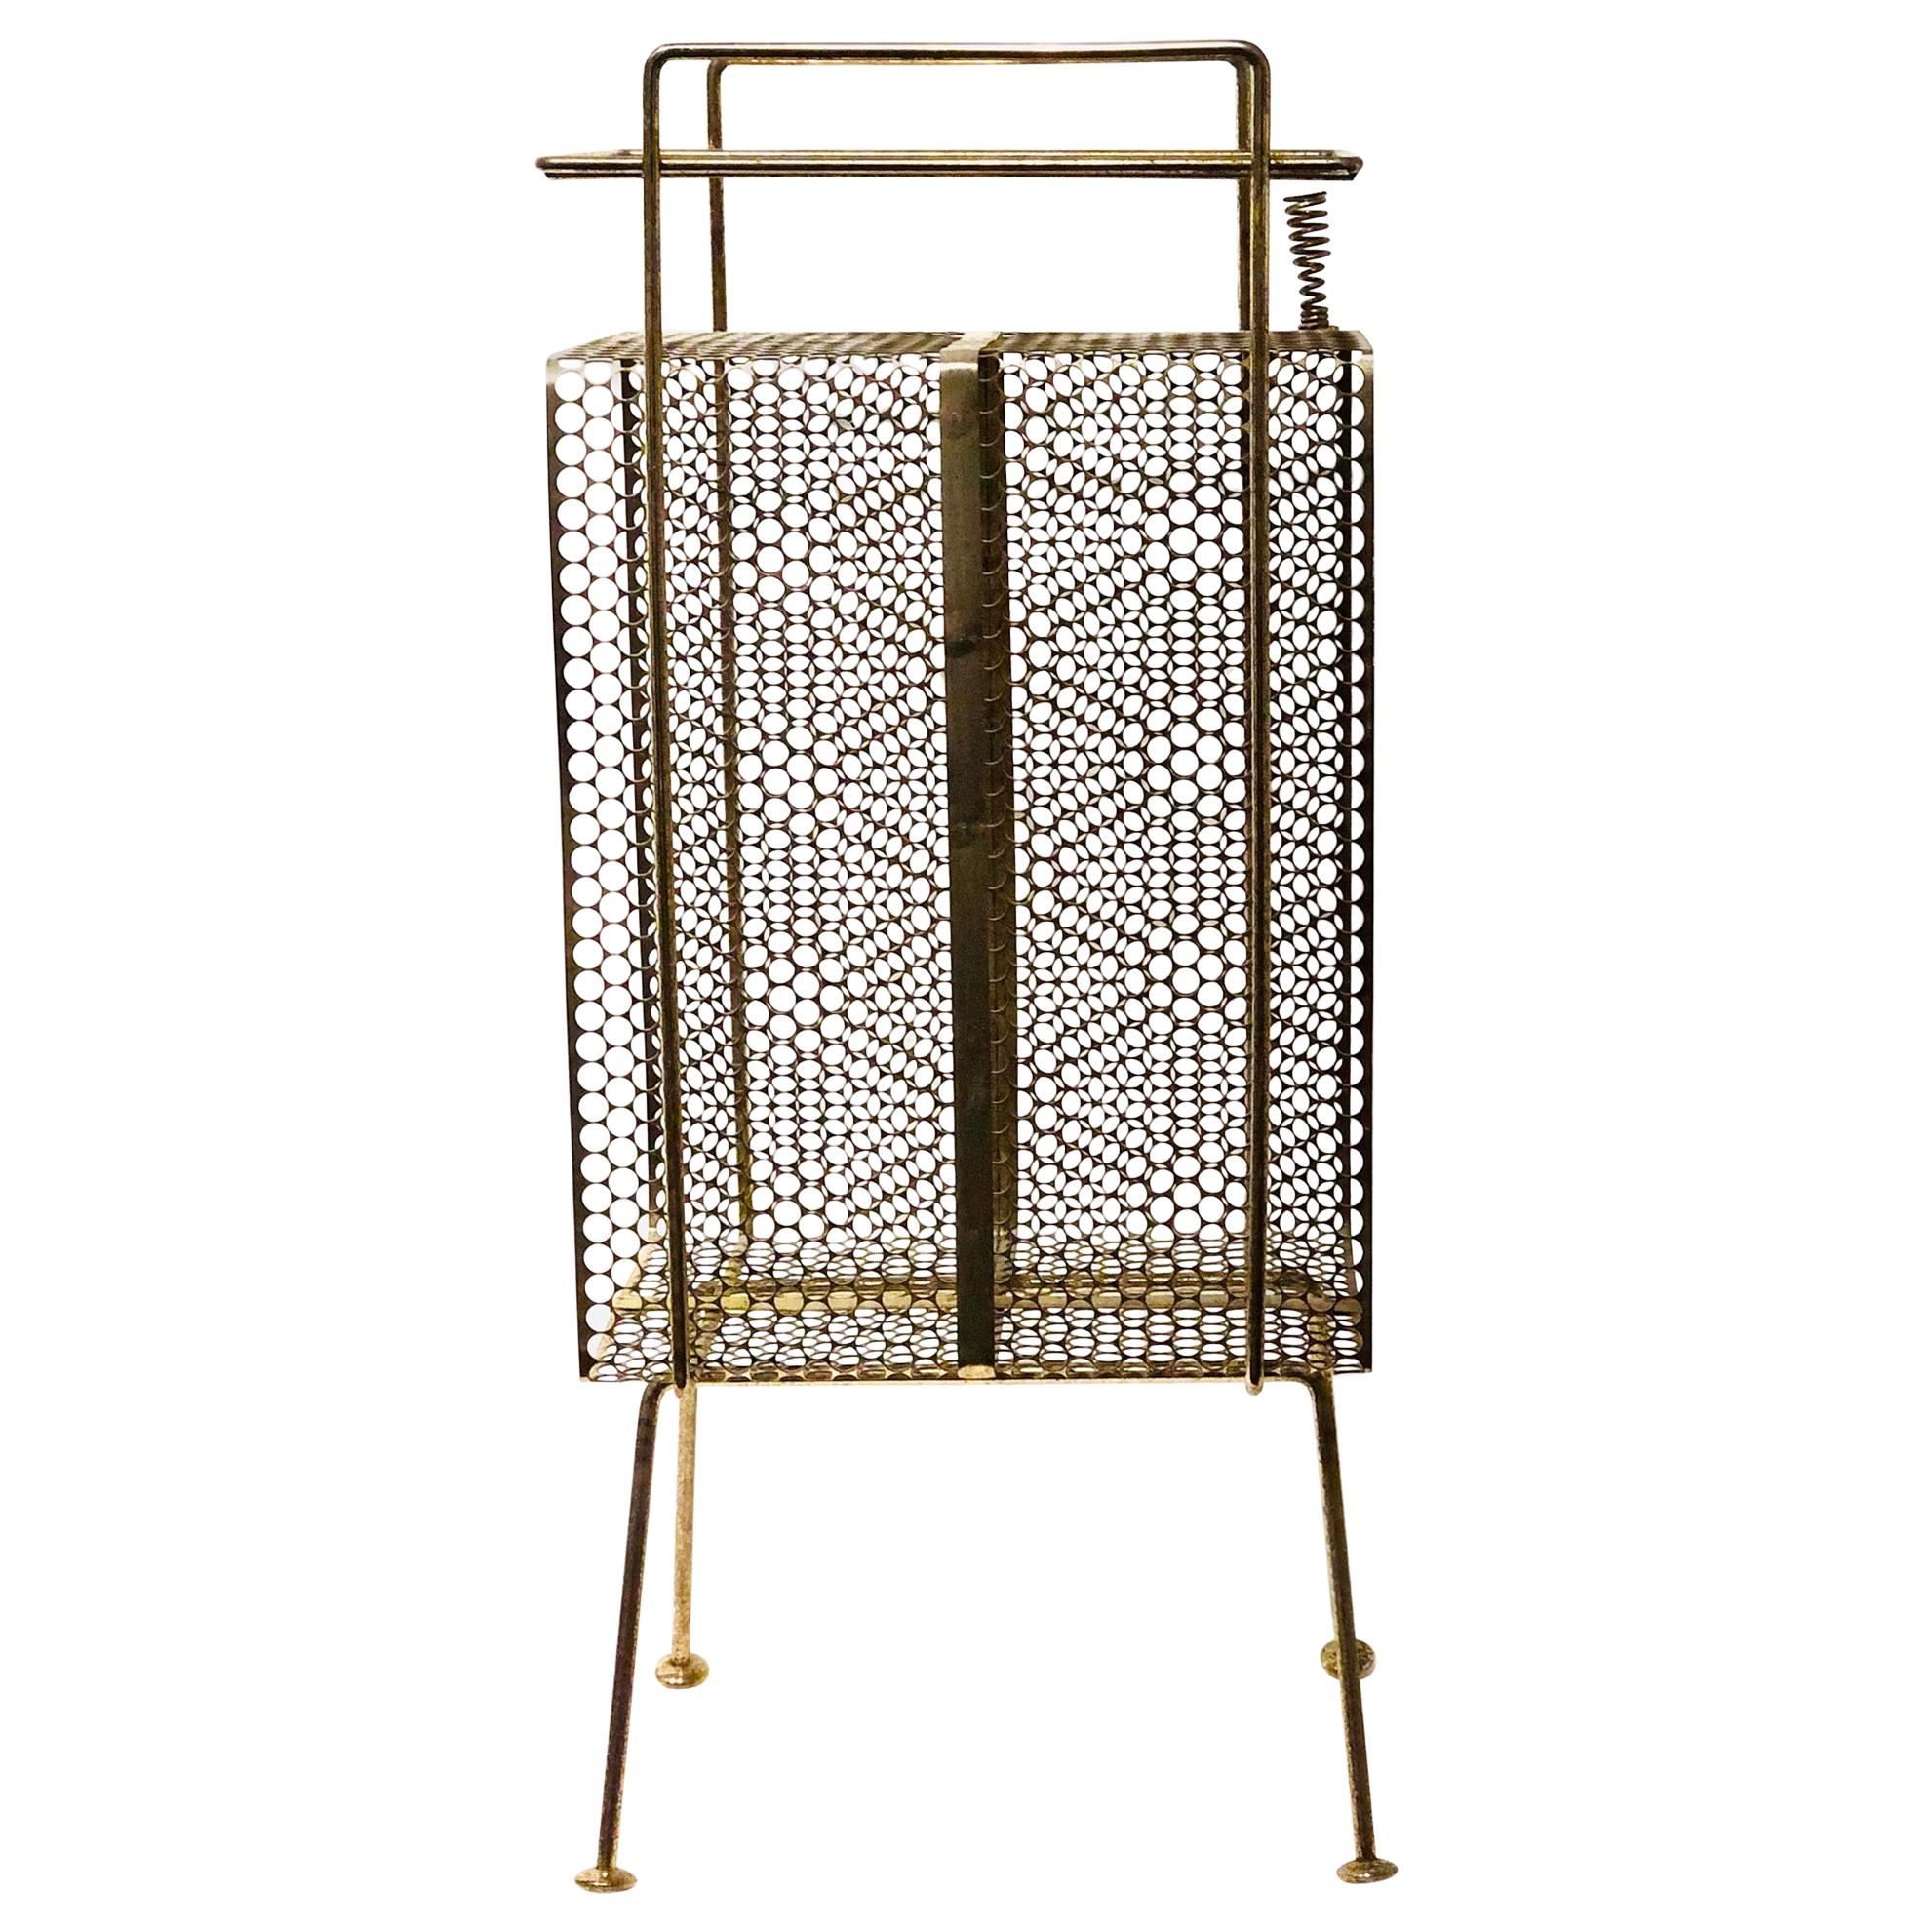 Richard Galef Wire Perforated Metal Stand/ Rack in Brass Finish